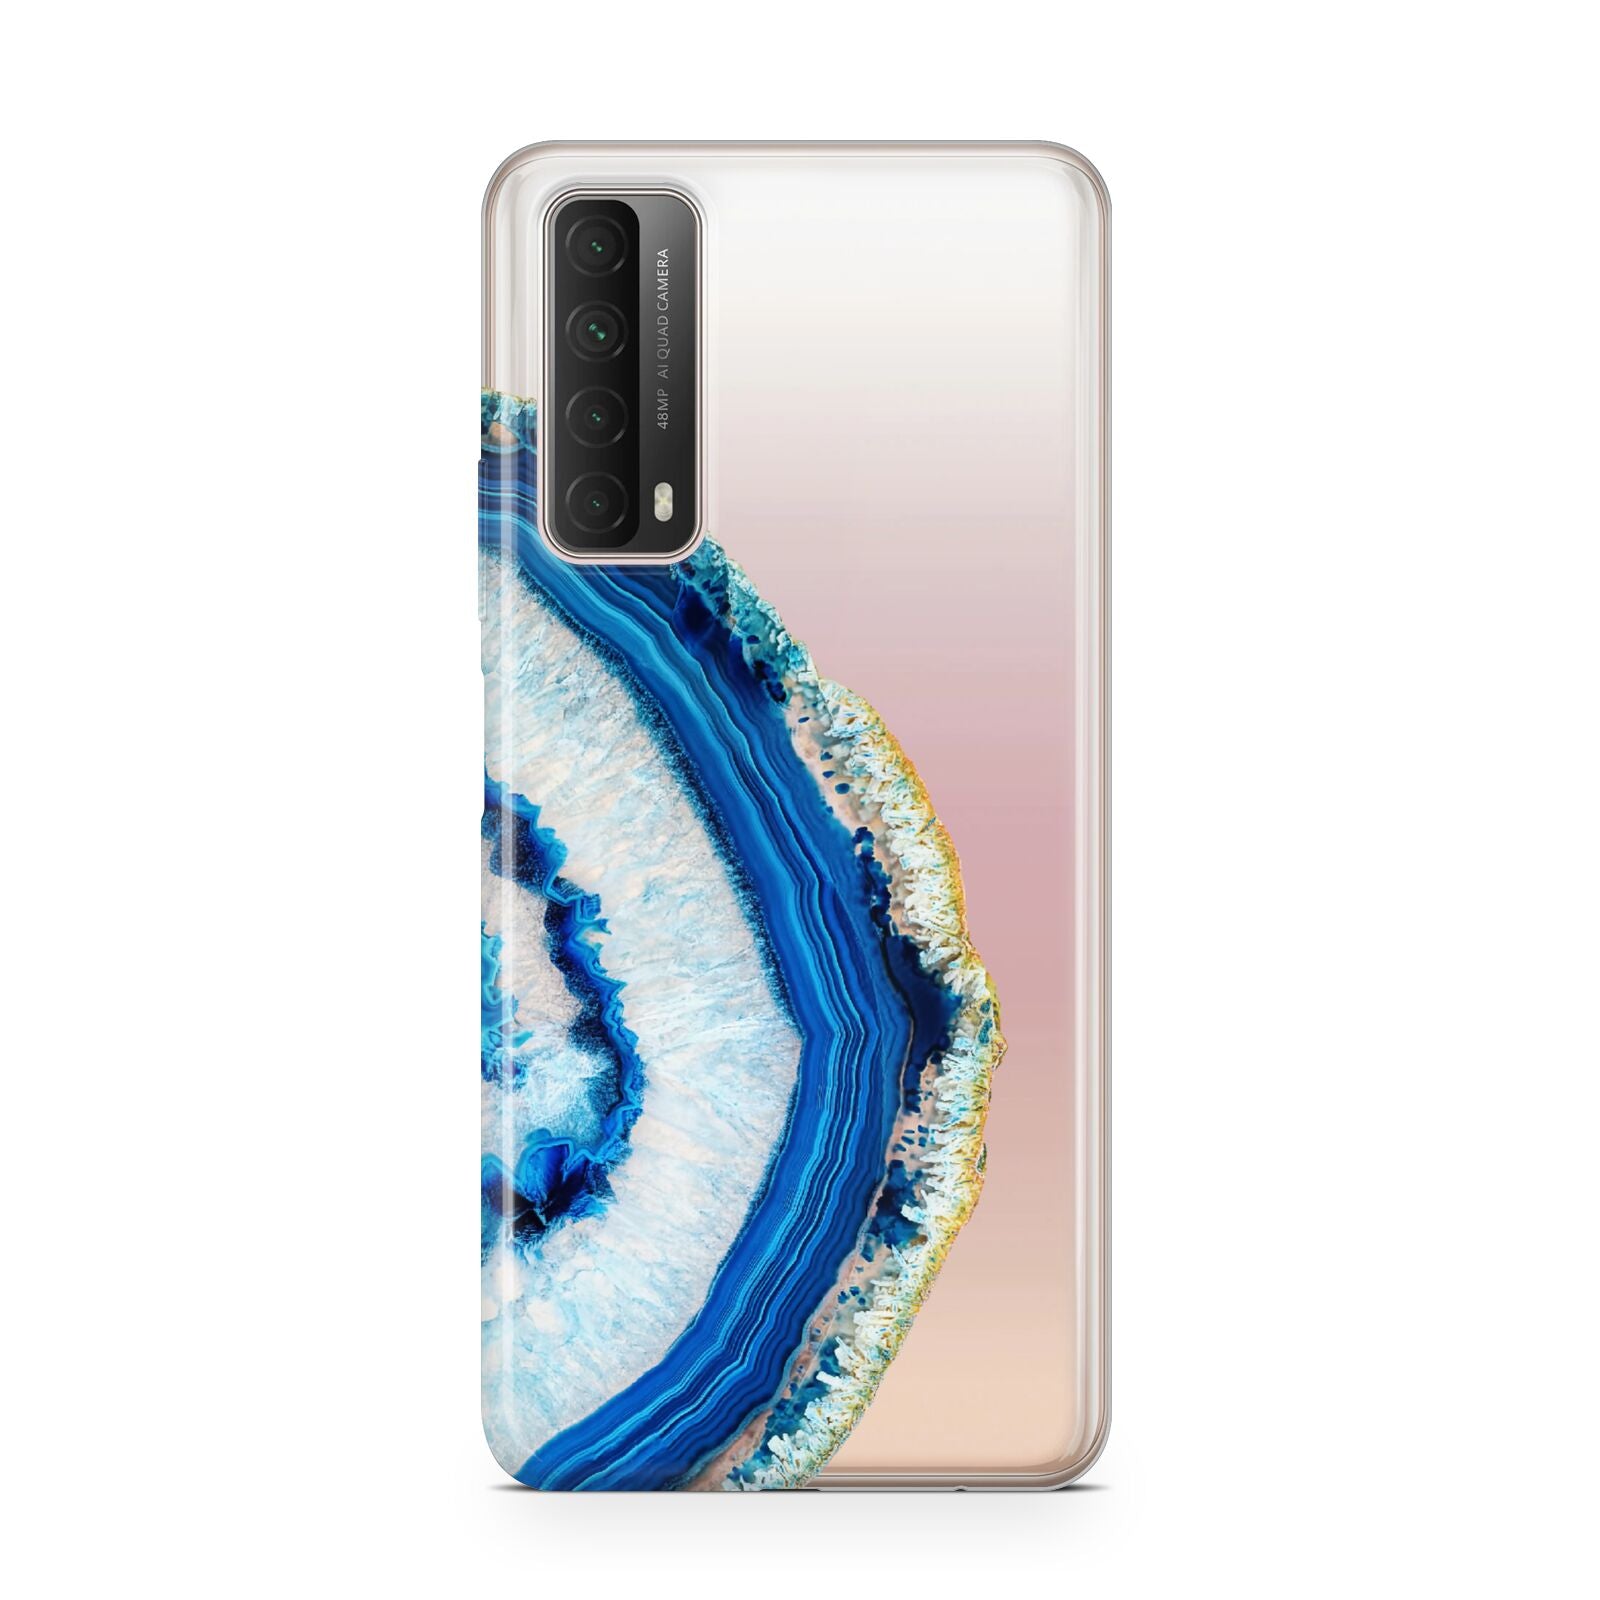 Agate Dark Blue and Turquoise Huawei P Smart 2021